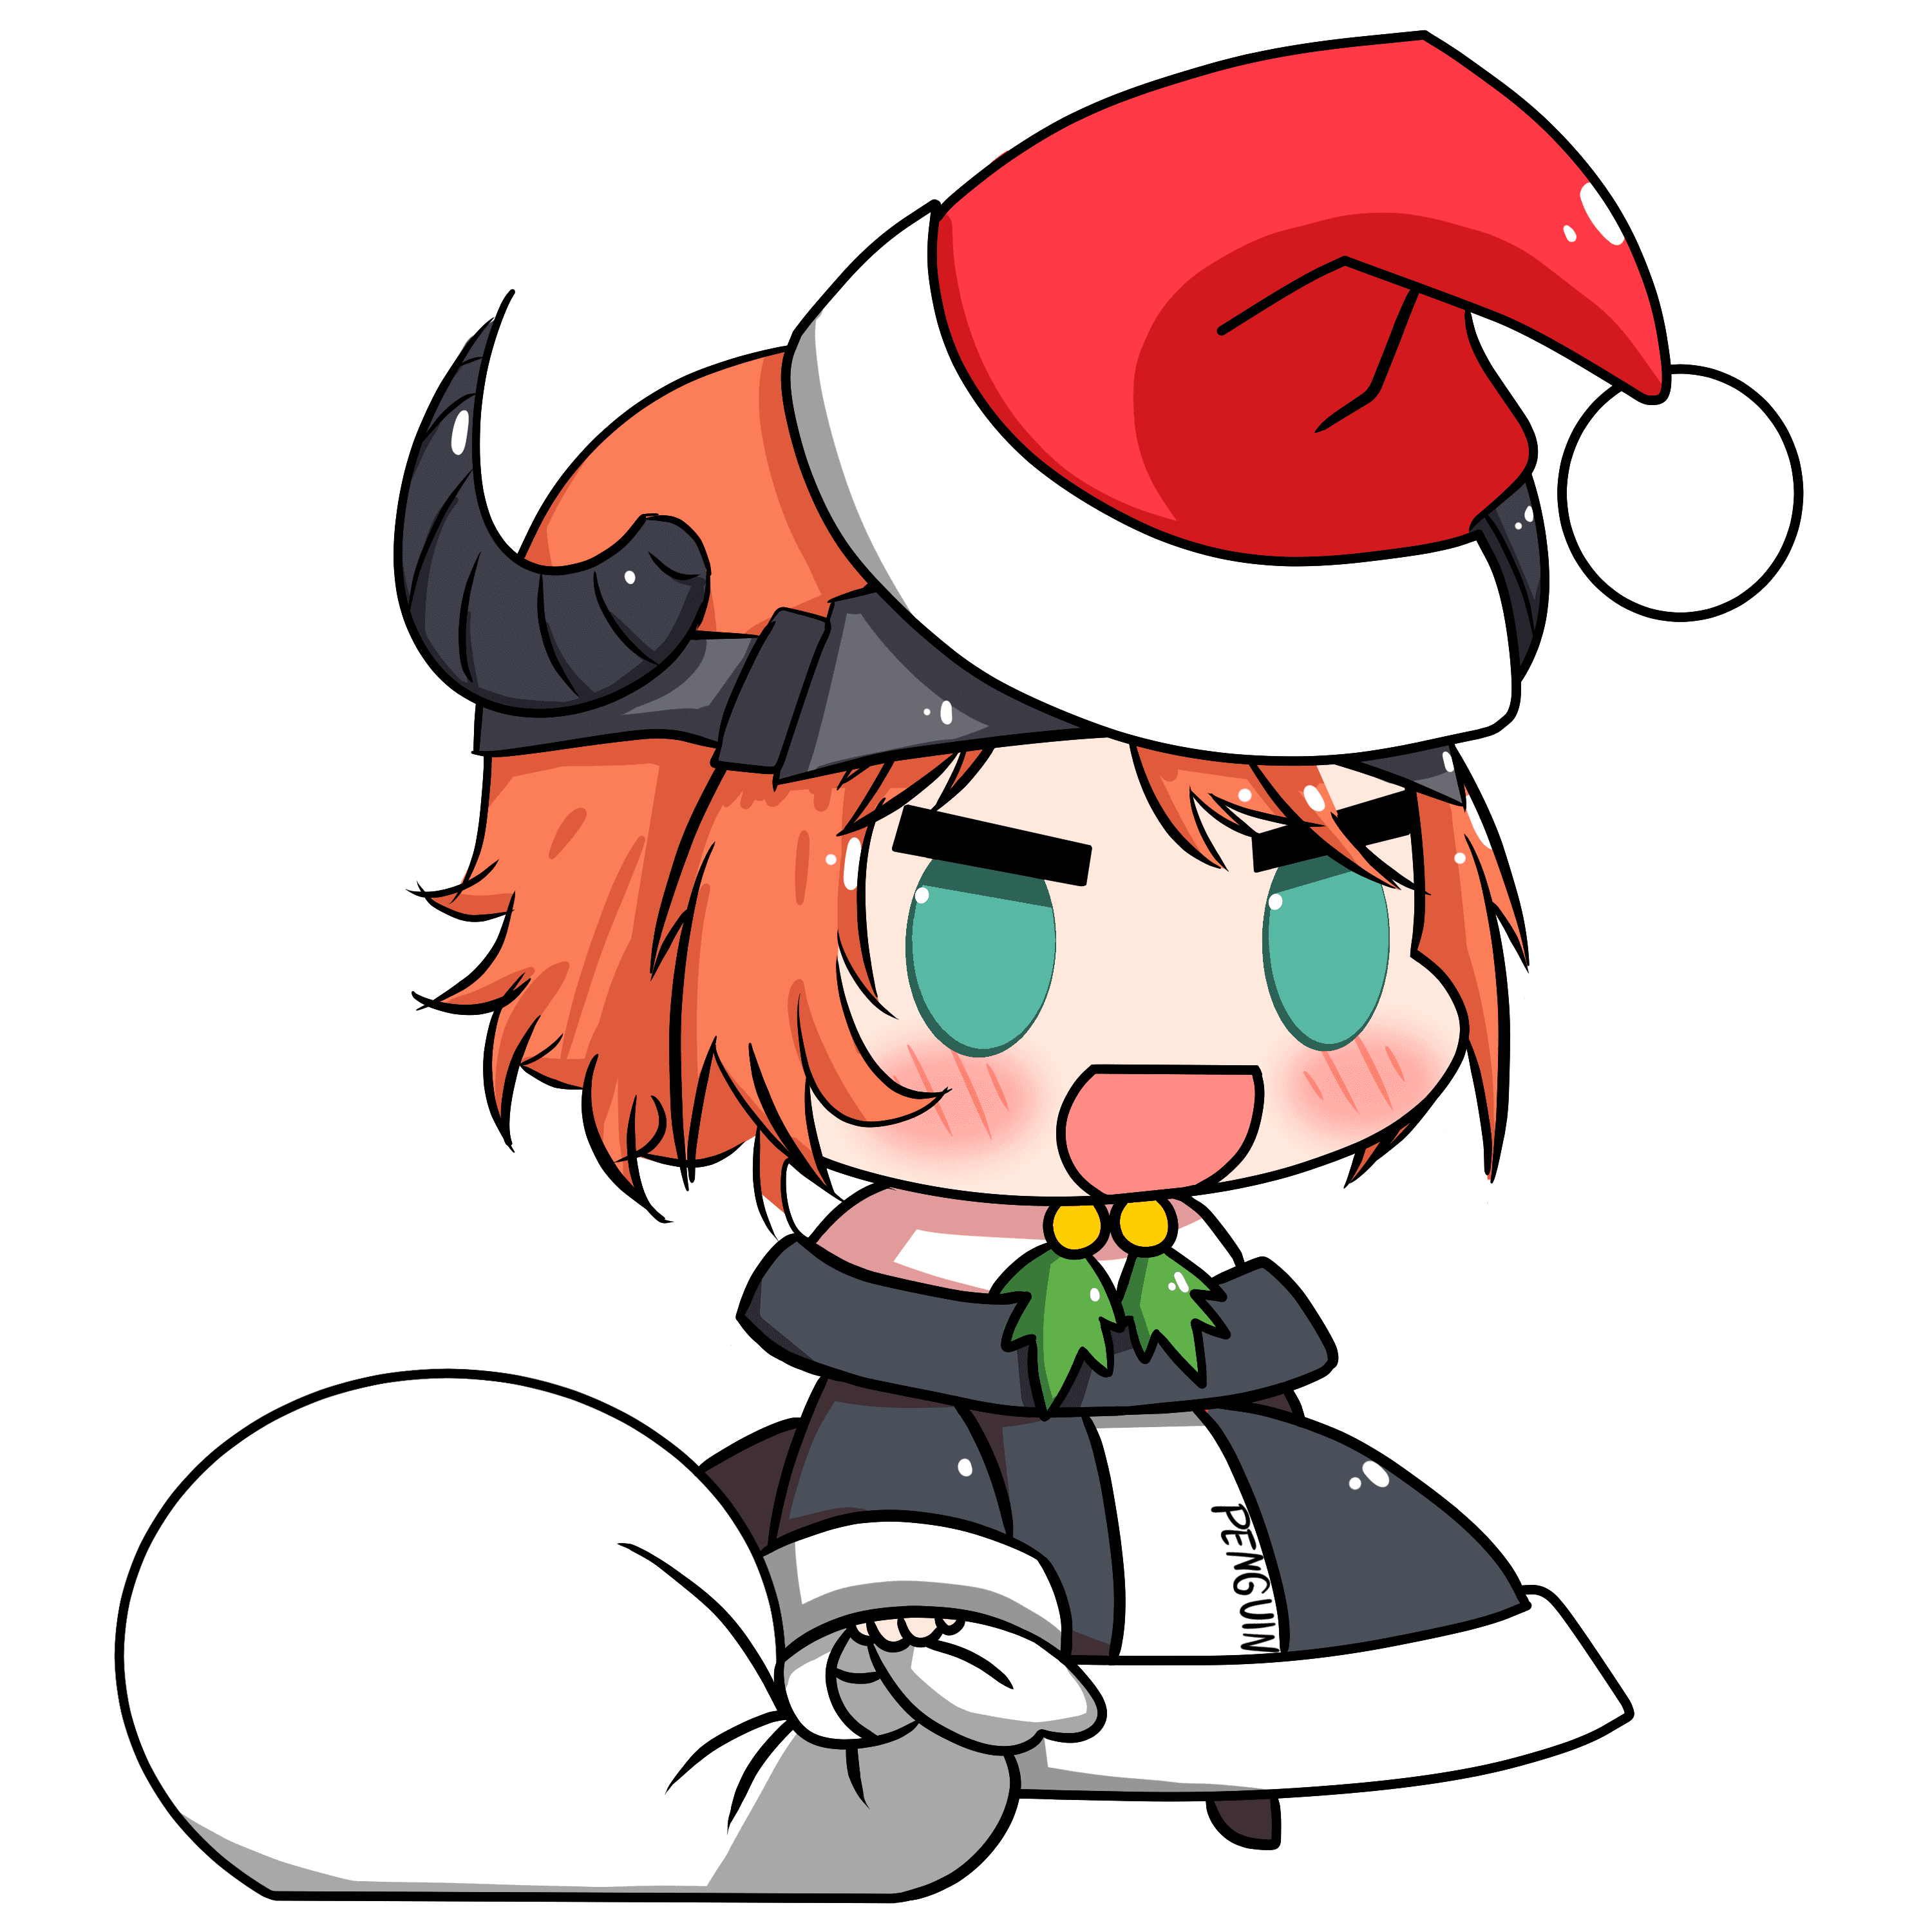 Versions of Croissant Padoru drawn by lefwer